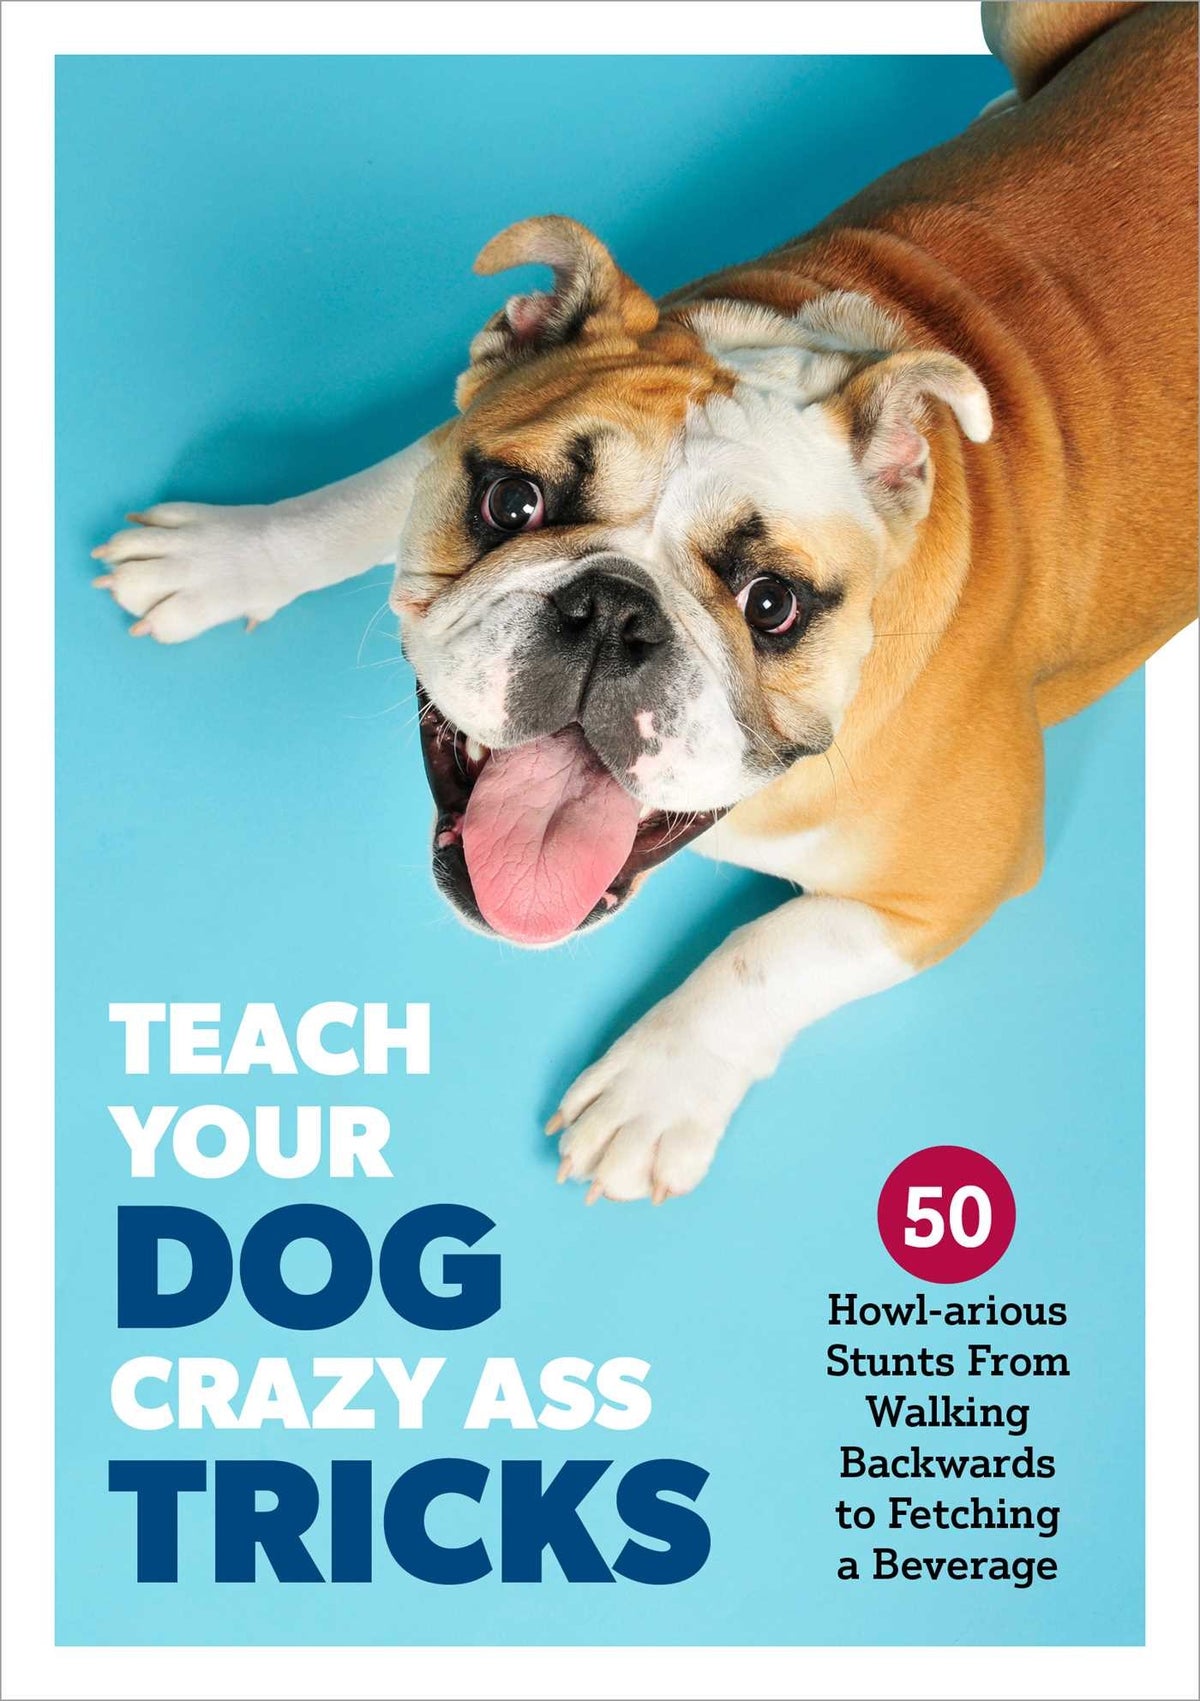 Teach Your Dog Crazy Ass Tricks: 50 Howl-arious Stunts From Walking Backwards to Fetching a Beverage